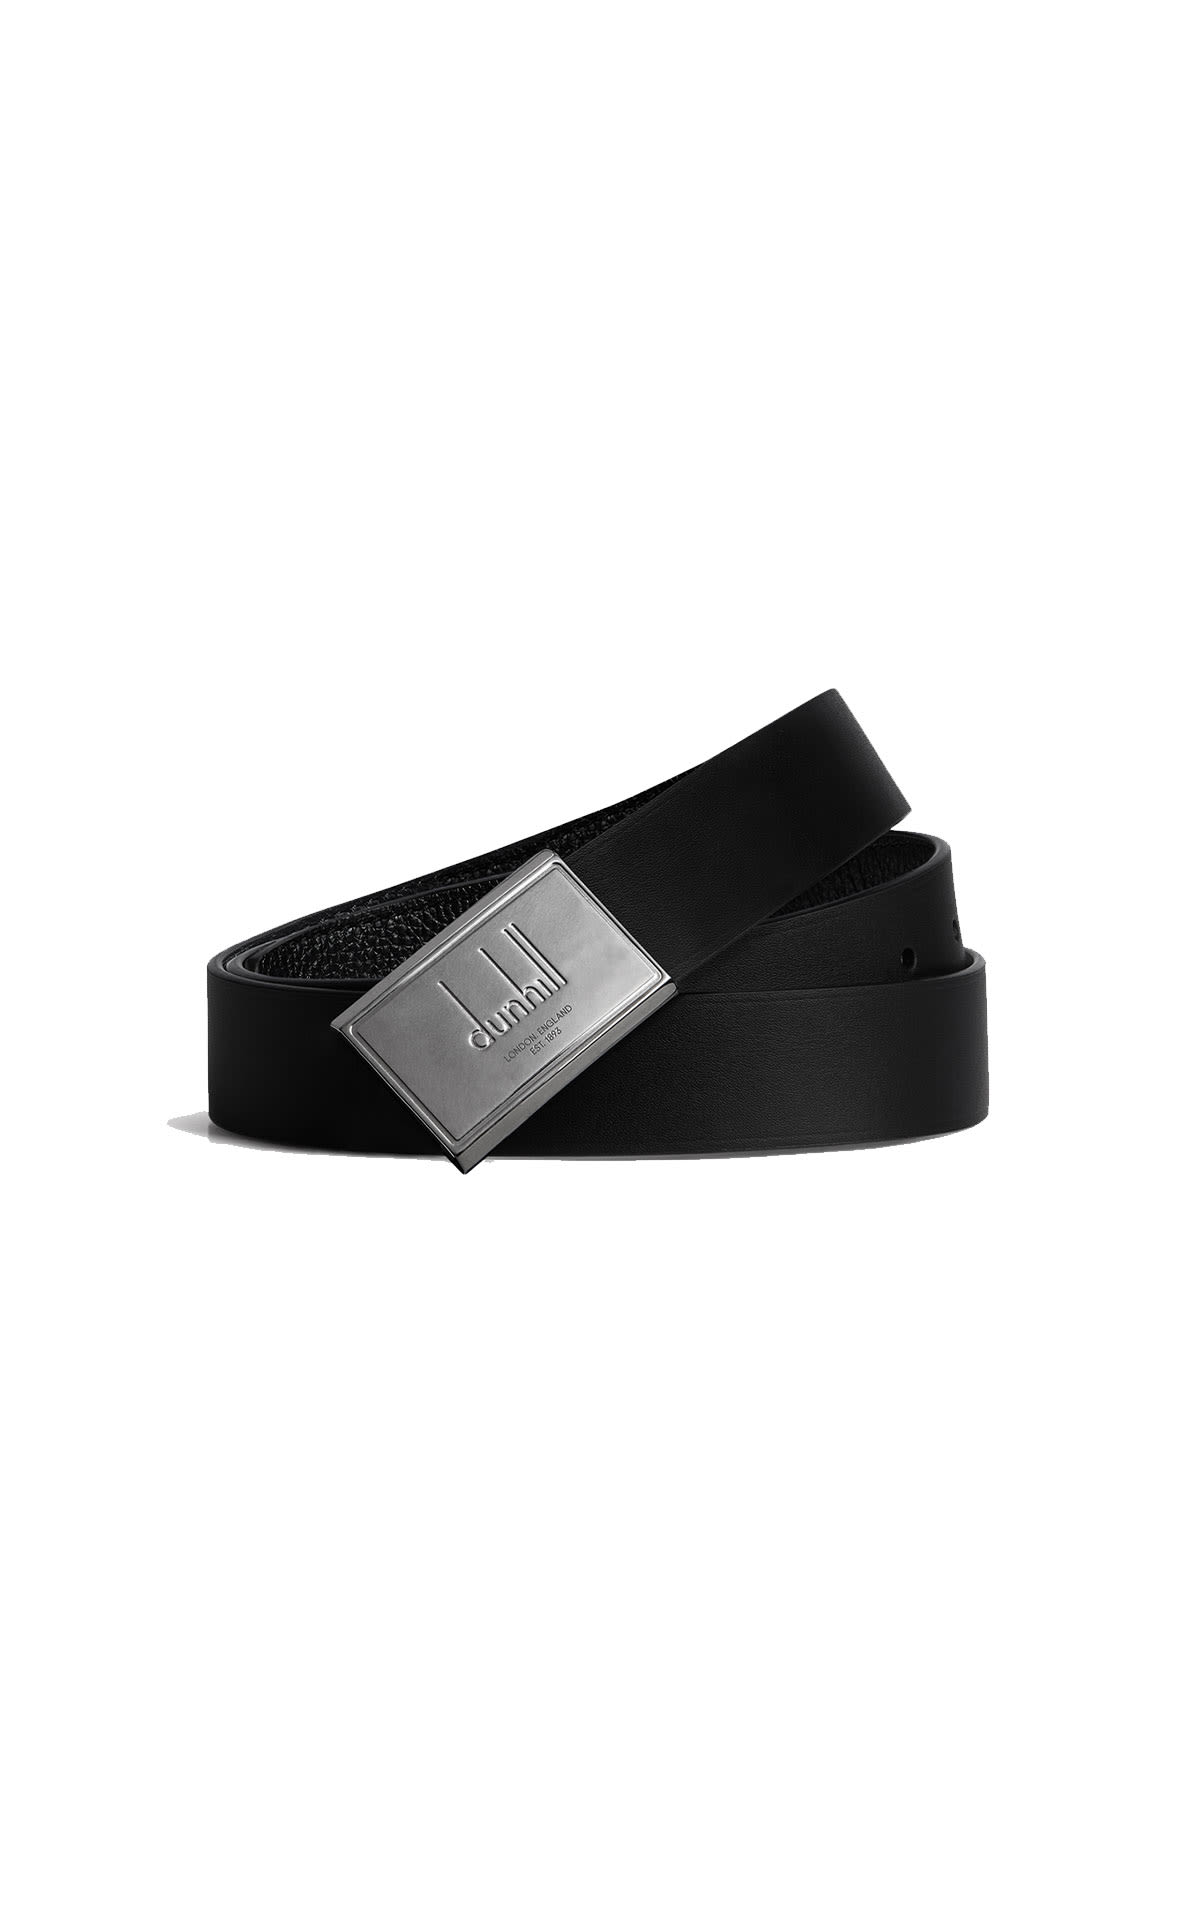 dunhill 30mm pin legacy belt black from Bicester Village